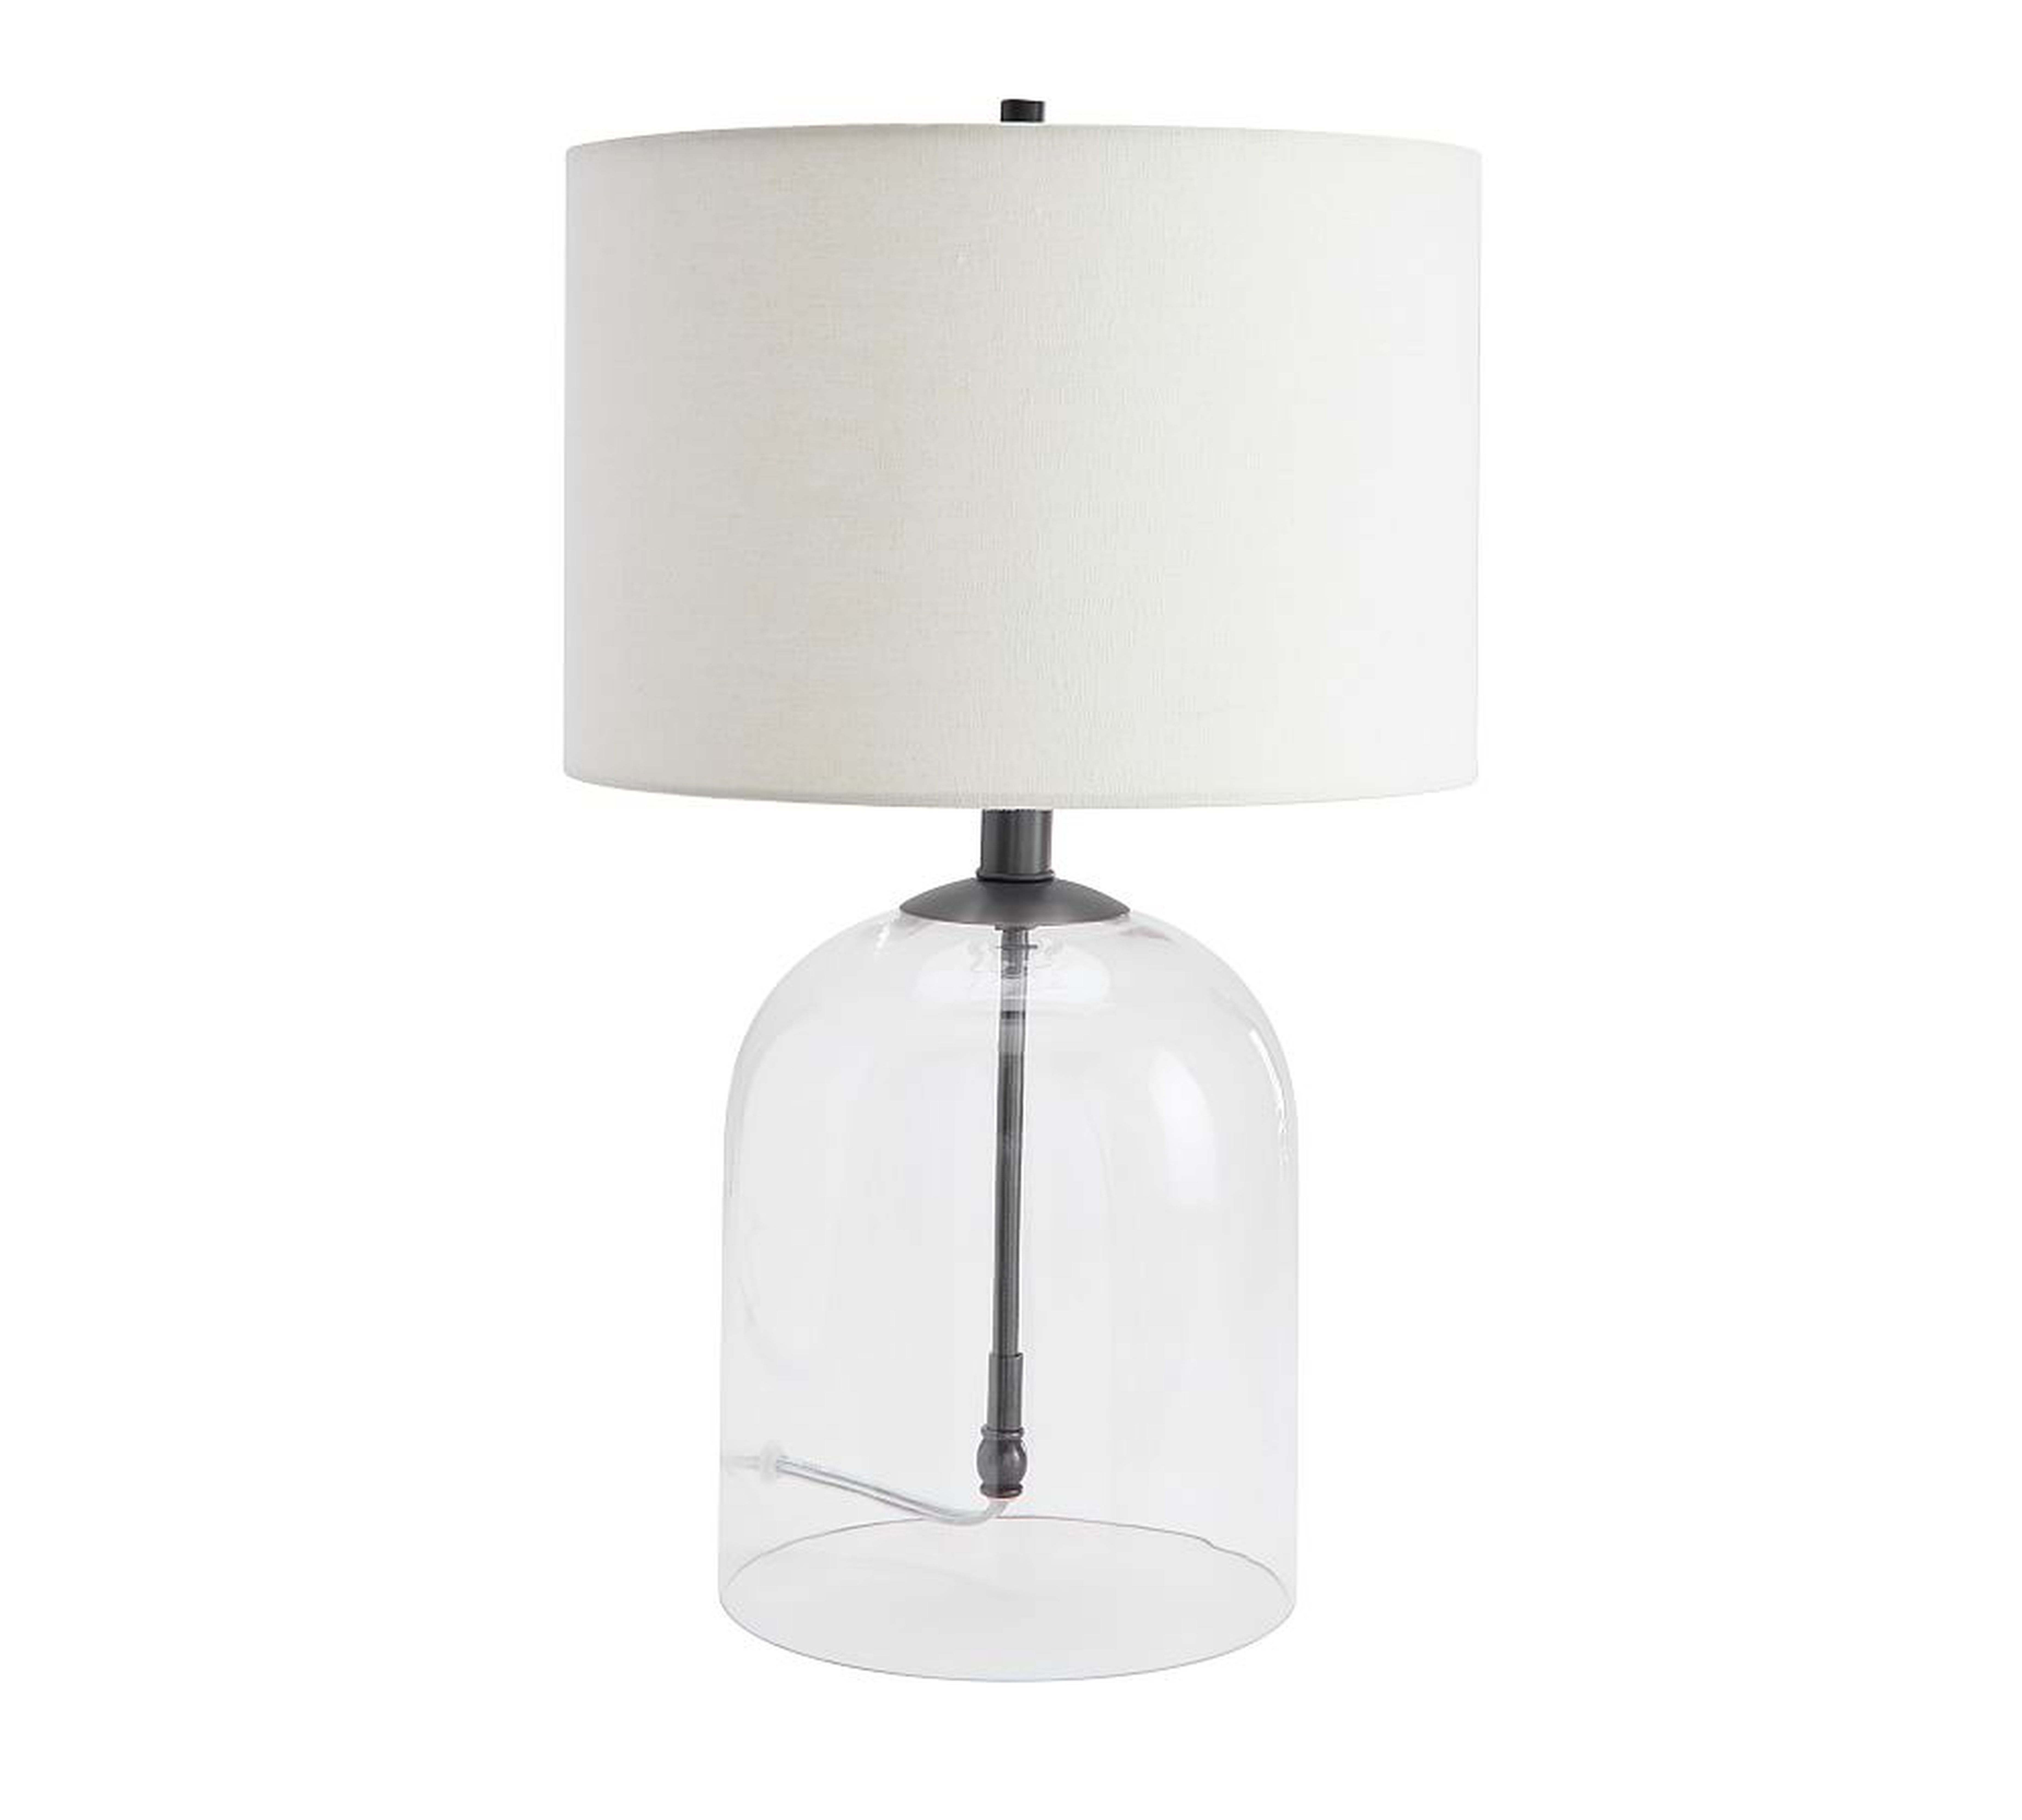 Aria Dome Table Lamp with Small Straight Sided Gallery Shade, Bronze - Pottery Barn